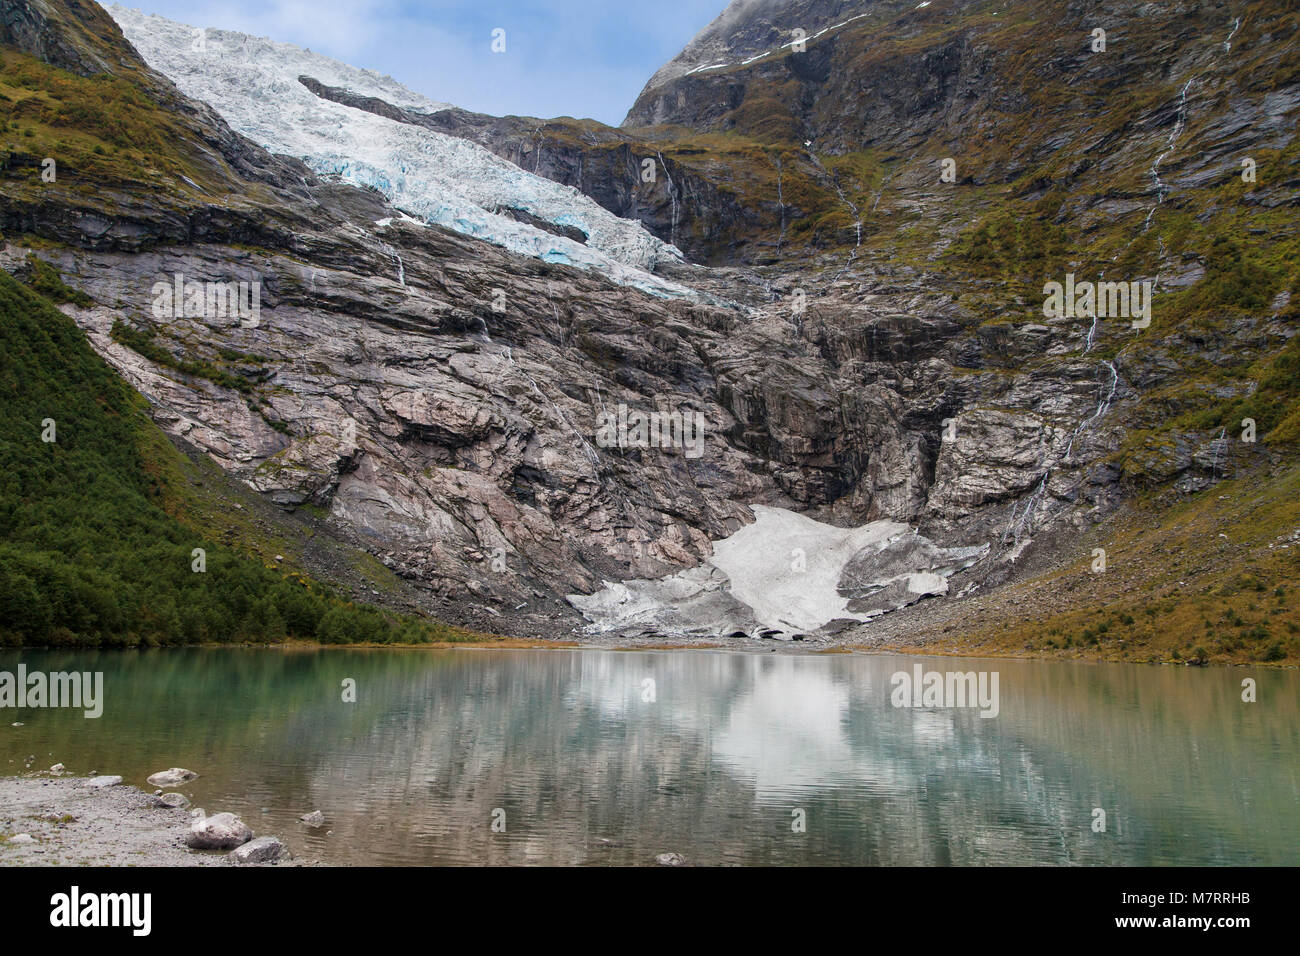 Boyabreen Glacier and Brevatnet Lake in the Jostedalsbreen National Park, Norway. Stock Photo